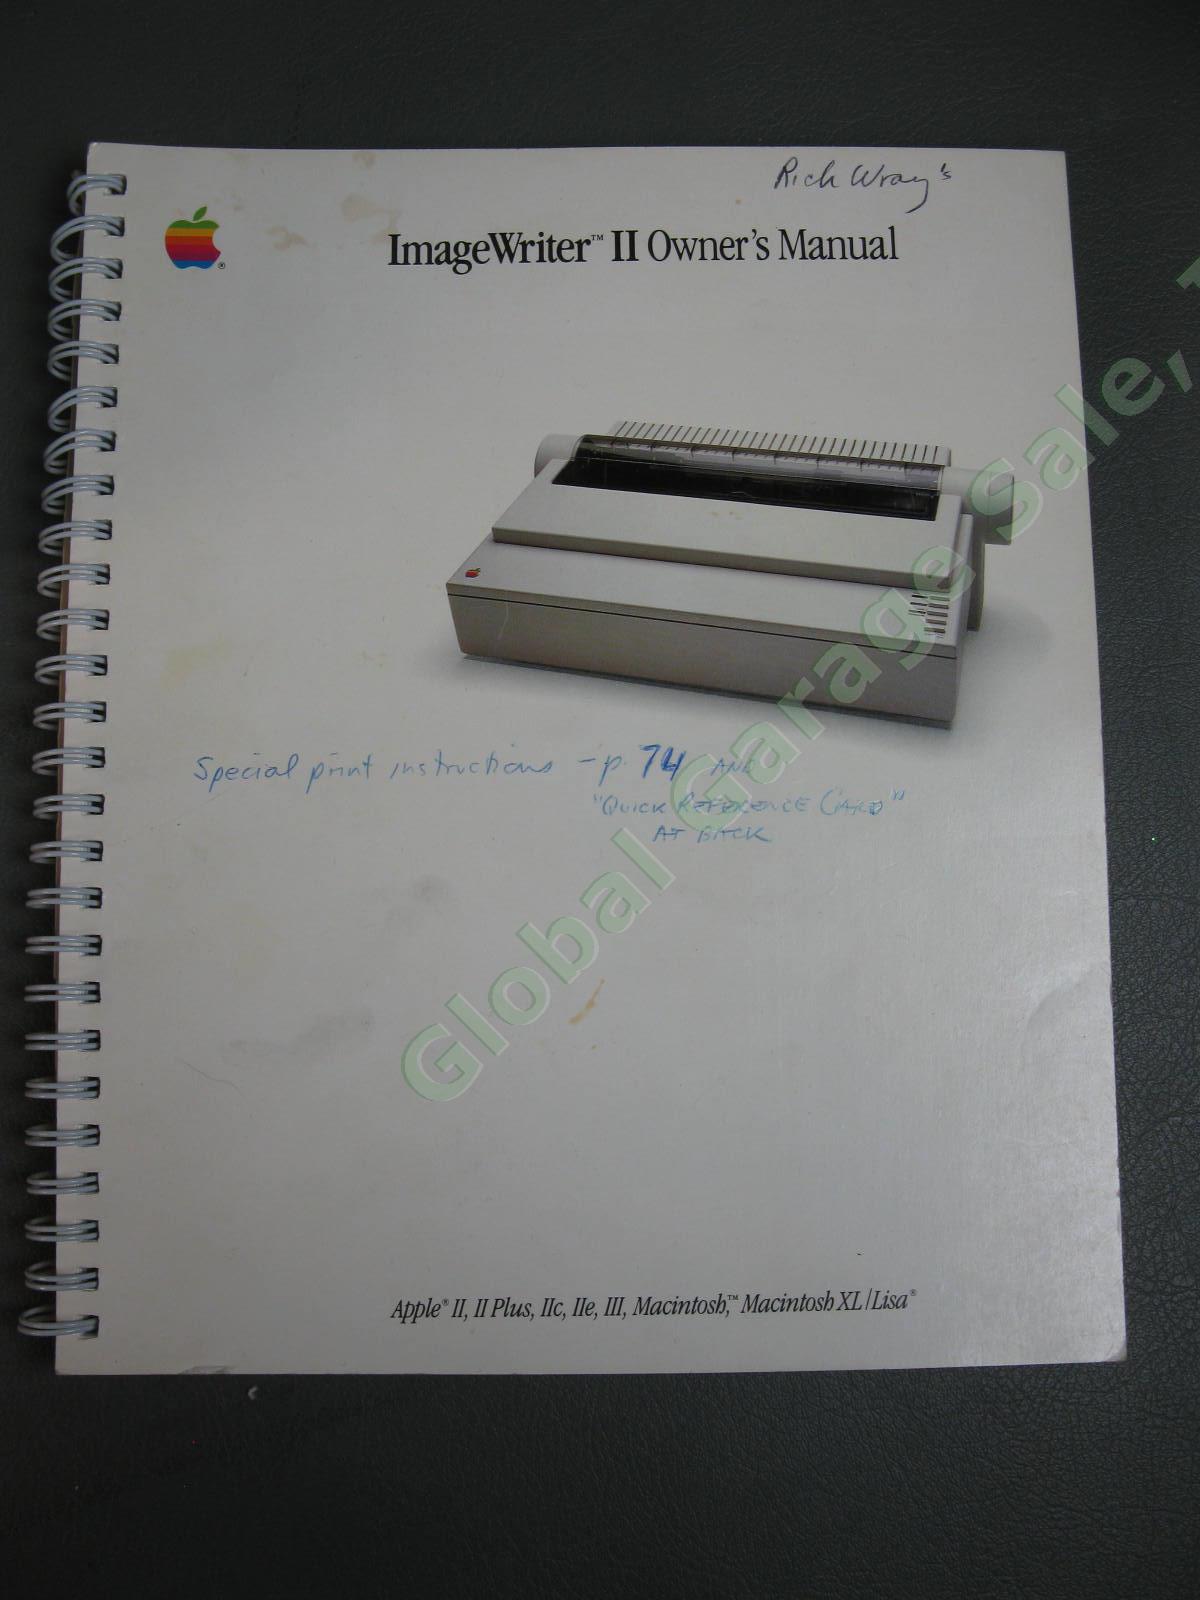 VTG Apple ImageWriter II Printer Manual Excellent Condition WORKING Needs Ribbon 9